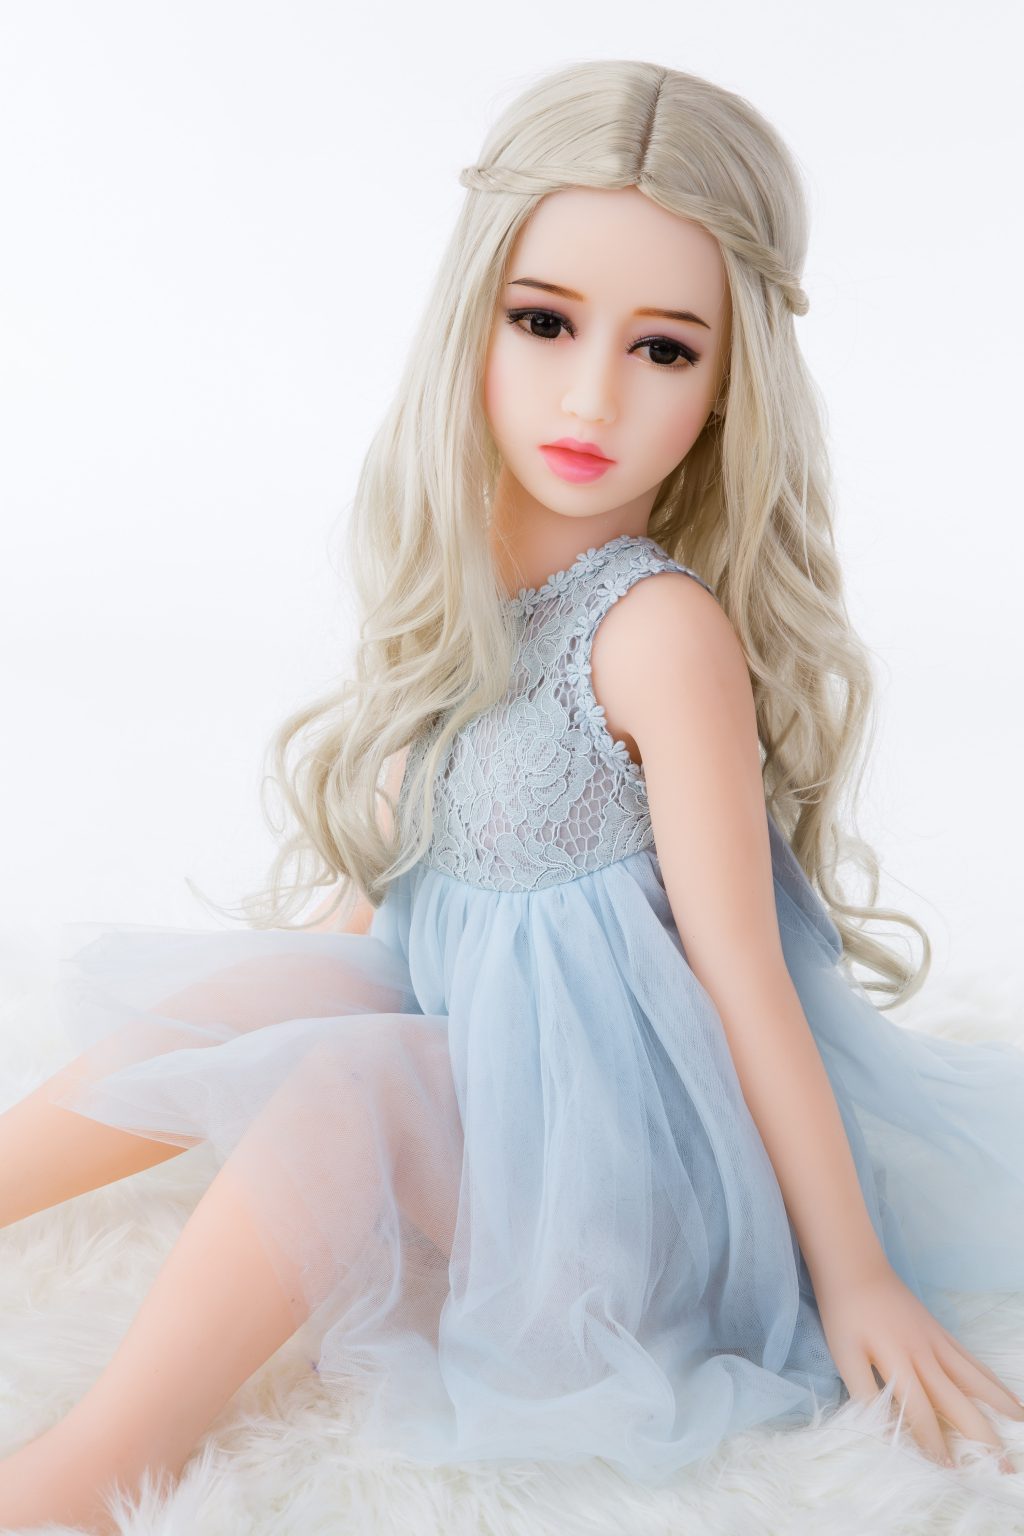 Lilian is doll for adult.